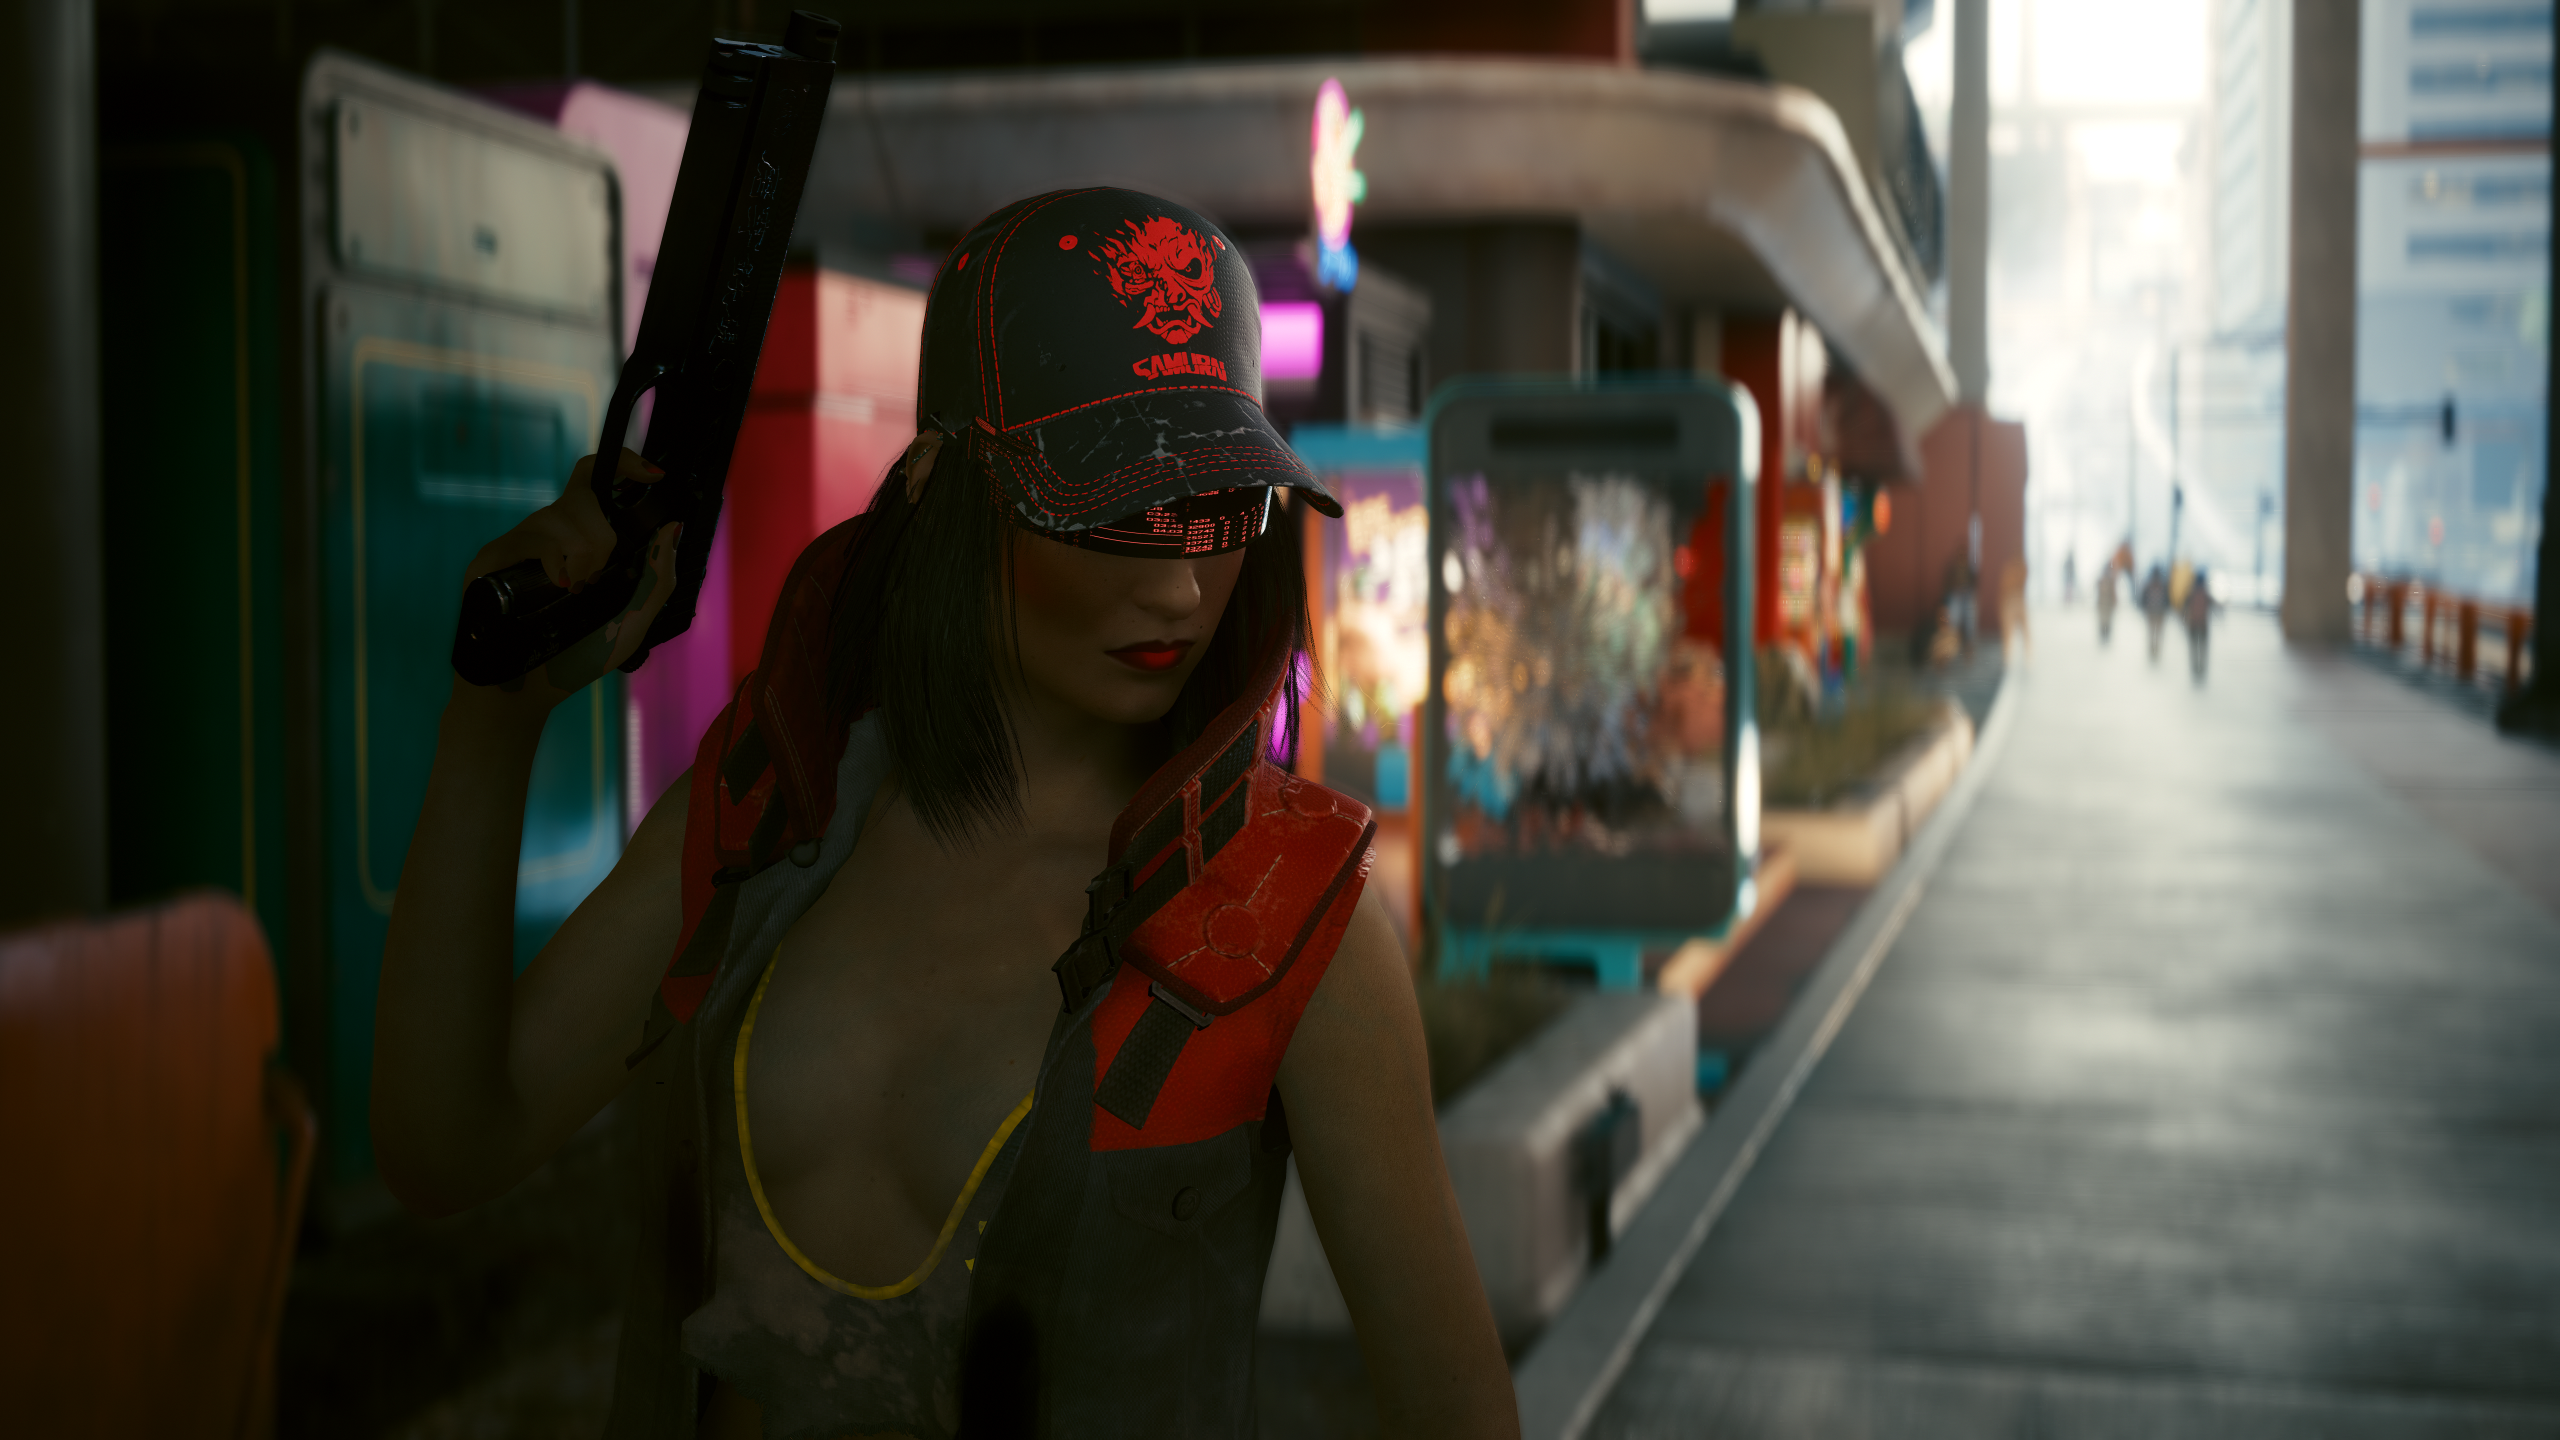 General 2560x1440 Cyberpunk 2077 portrait depth of field cleavage video game girls jacket standing girls with guns video games eyes hidden video game characters CGI lipstick red lipstick closed mouth building bare shoulders gun hat women with hats